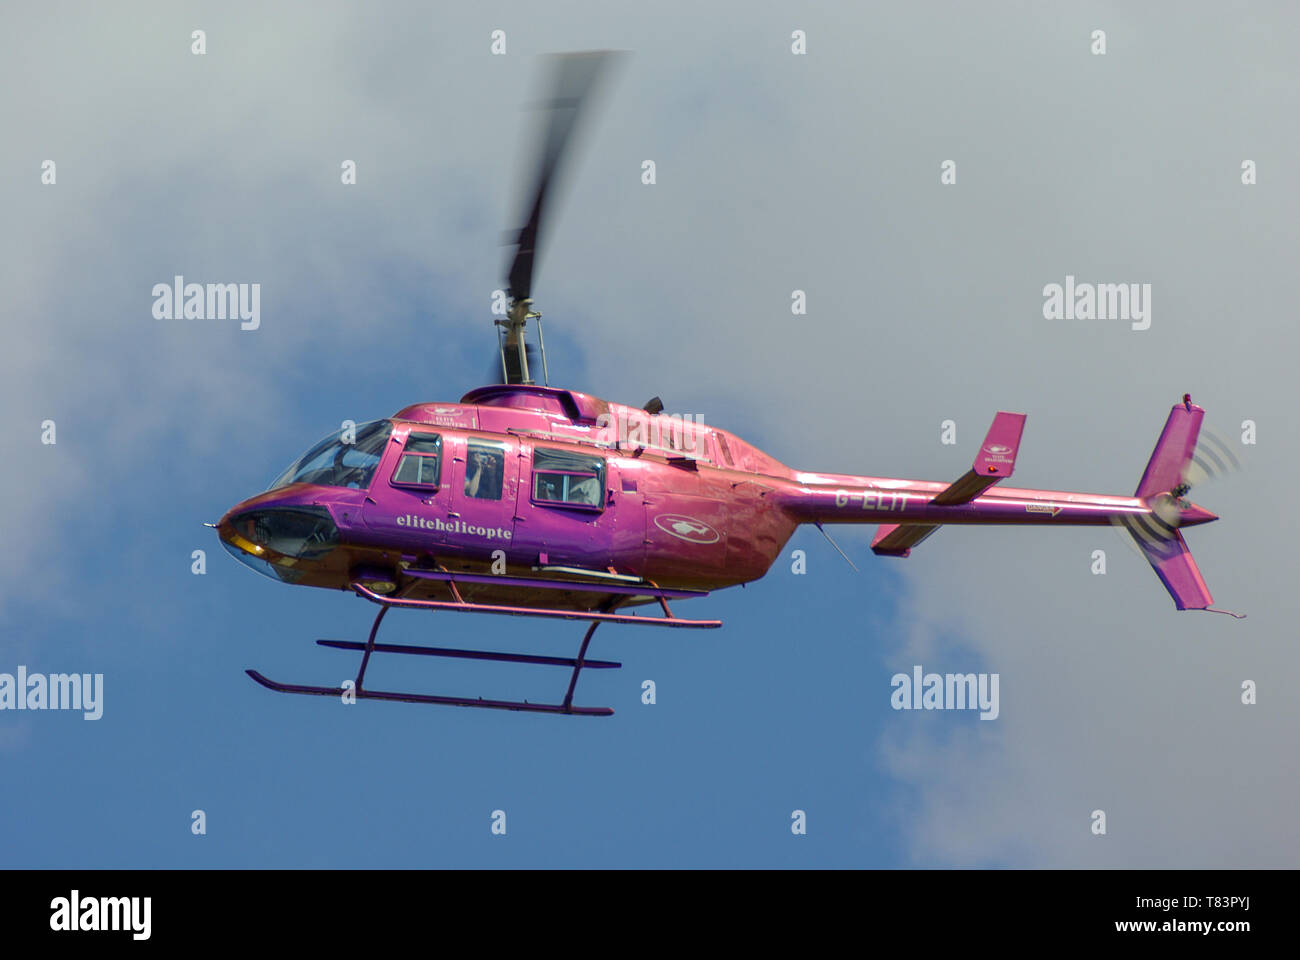 Bell 206 Longranger helicopter G-ELIT of Elite Helicopters (Henfield Lodge Aviation) flying. Civilian transport helicopter. Iridescent paint scheme Stock Photo